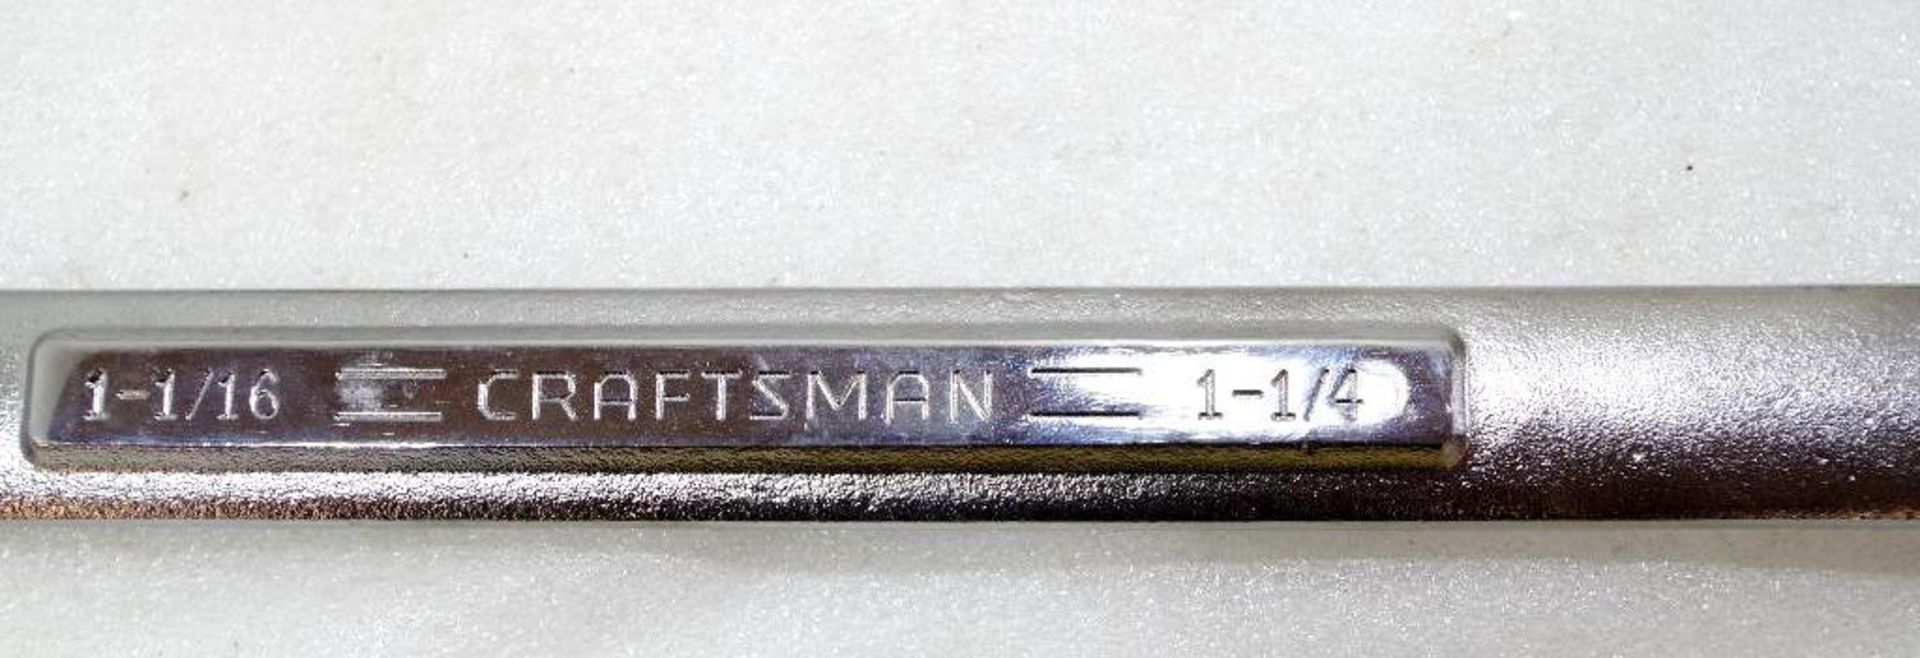 (4) NEW CRAFTSMAN Box-End Wrenches, 1-1/16" / 1-1/4", Forged in USA - Image 2 of 3